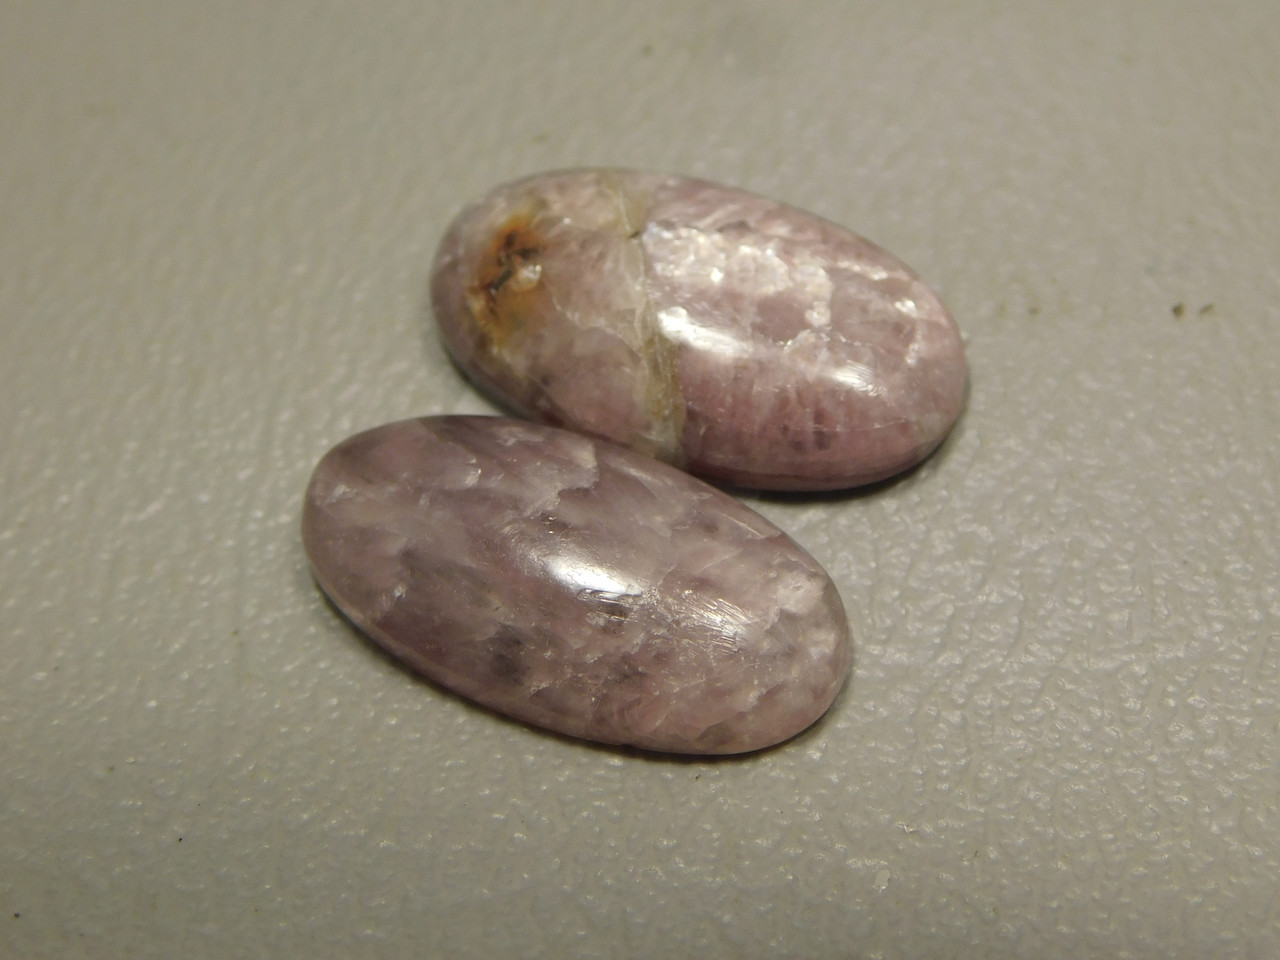 Shimmery Lavender Lepidolite Matched Pairs Stones Cabochons #4